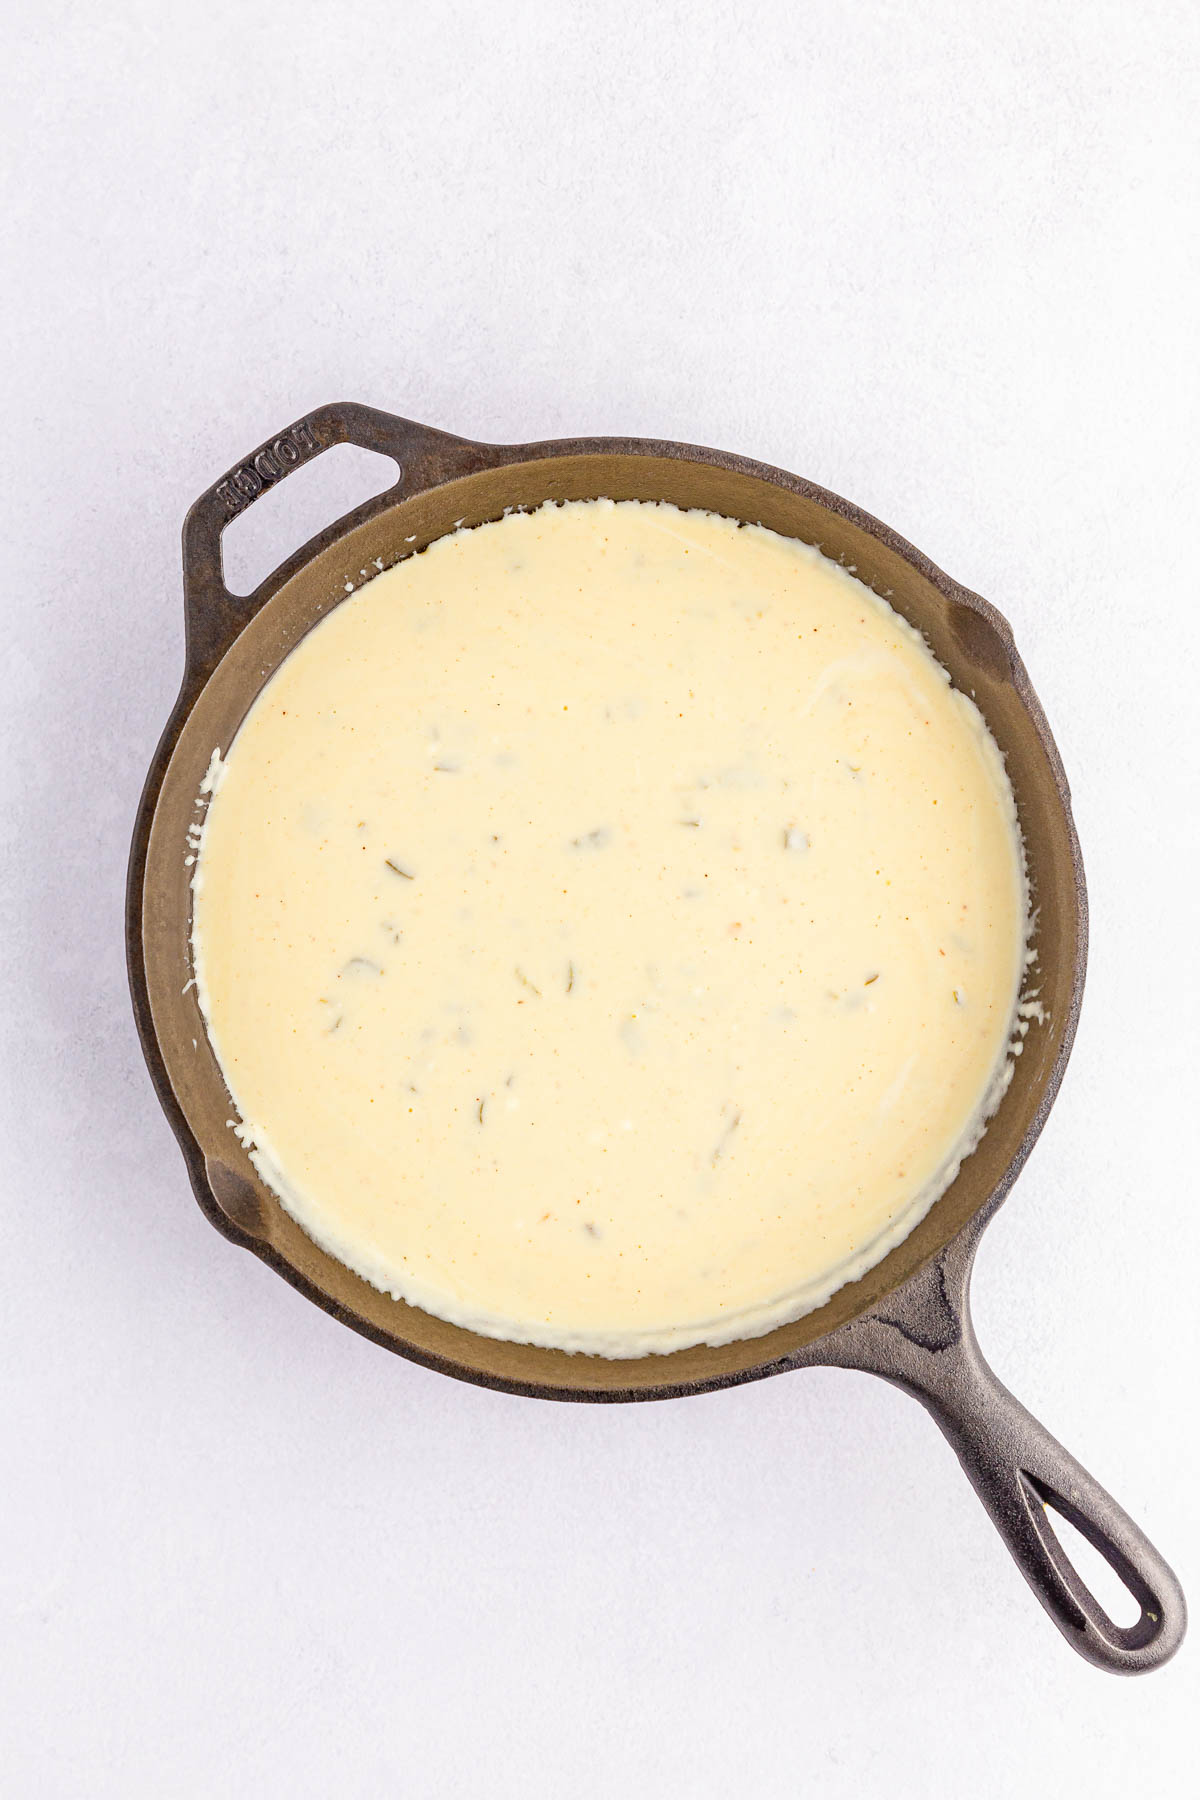 White queso dip in cast iron skillet